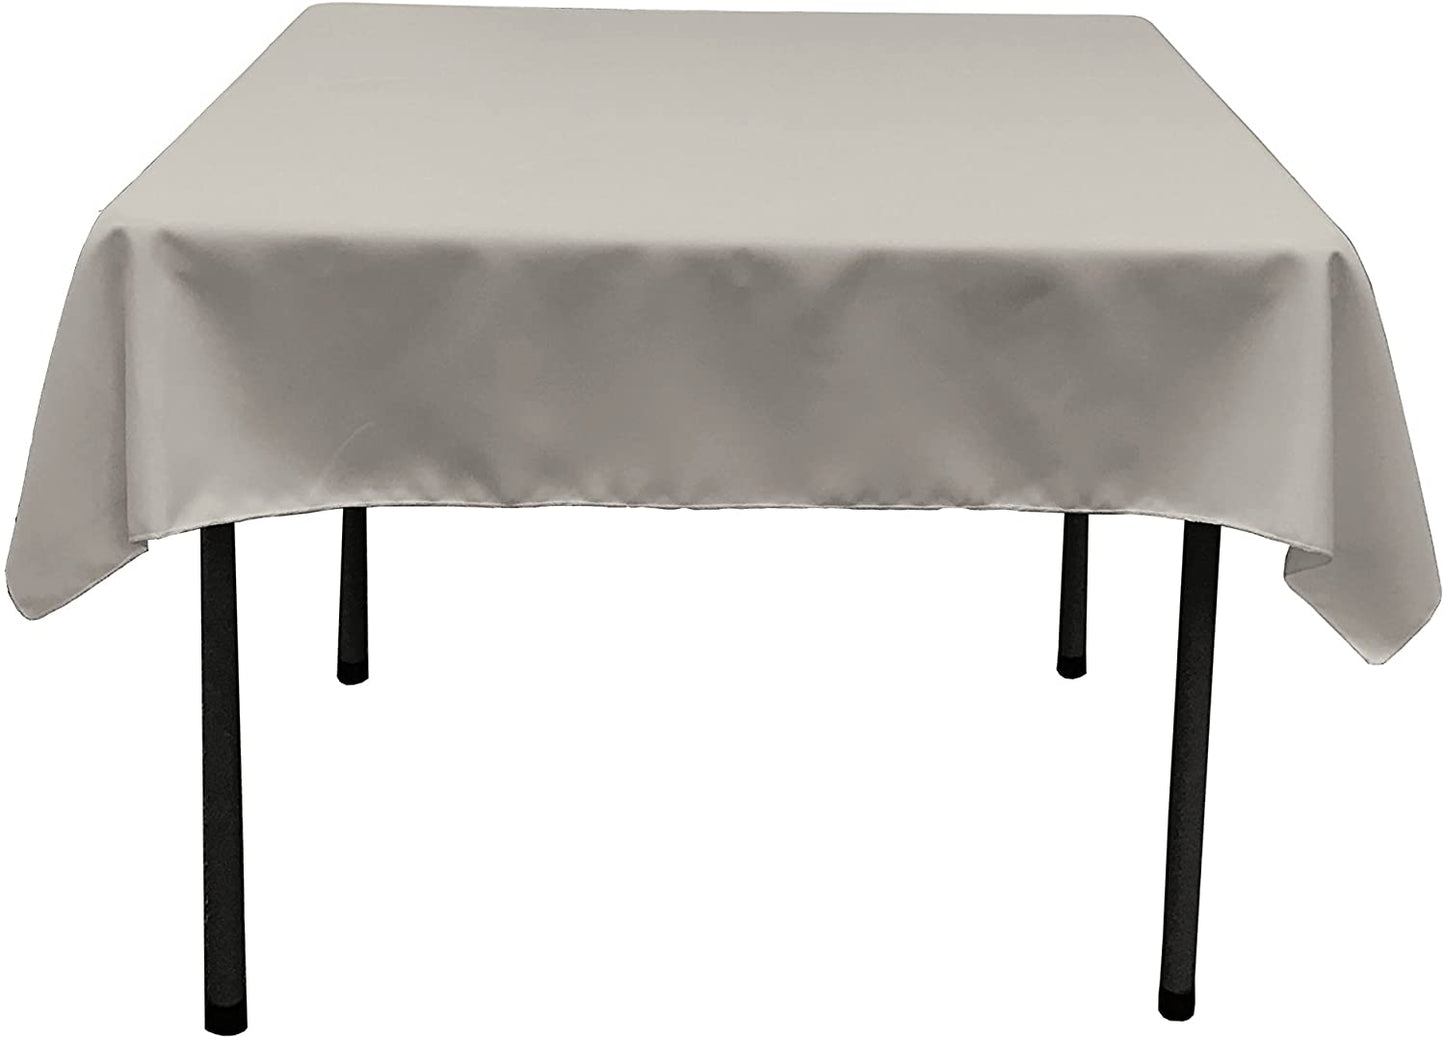 Polyester Poplin Washable Square Tablecloth, Stain and Wrinkle Resistant Table Cover Silver